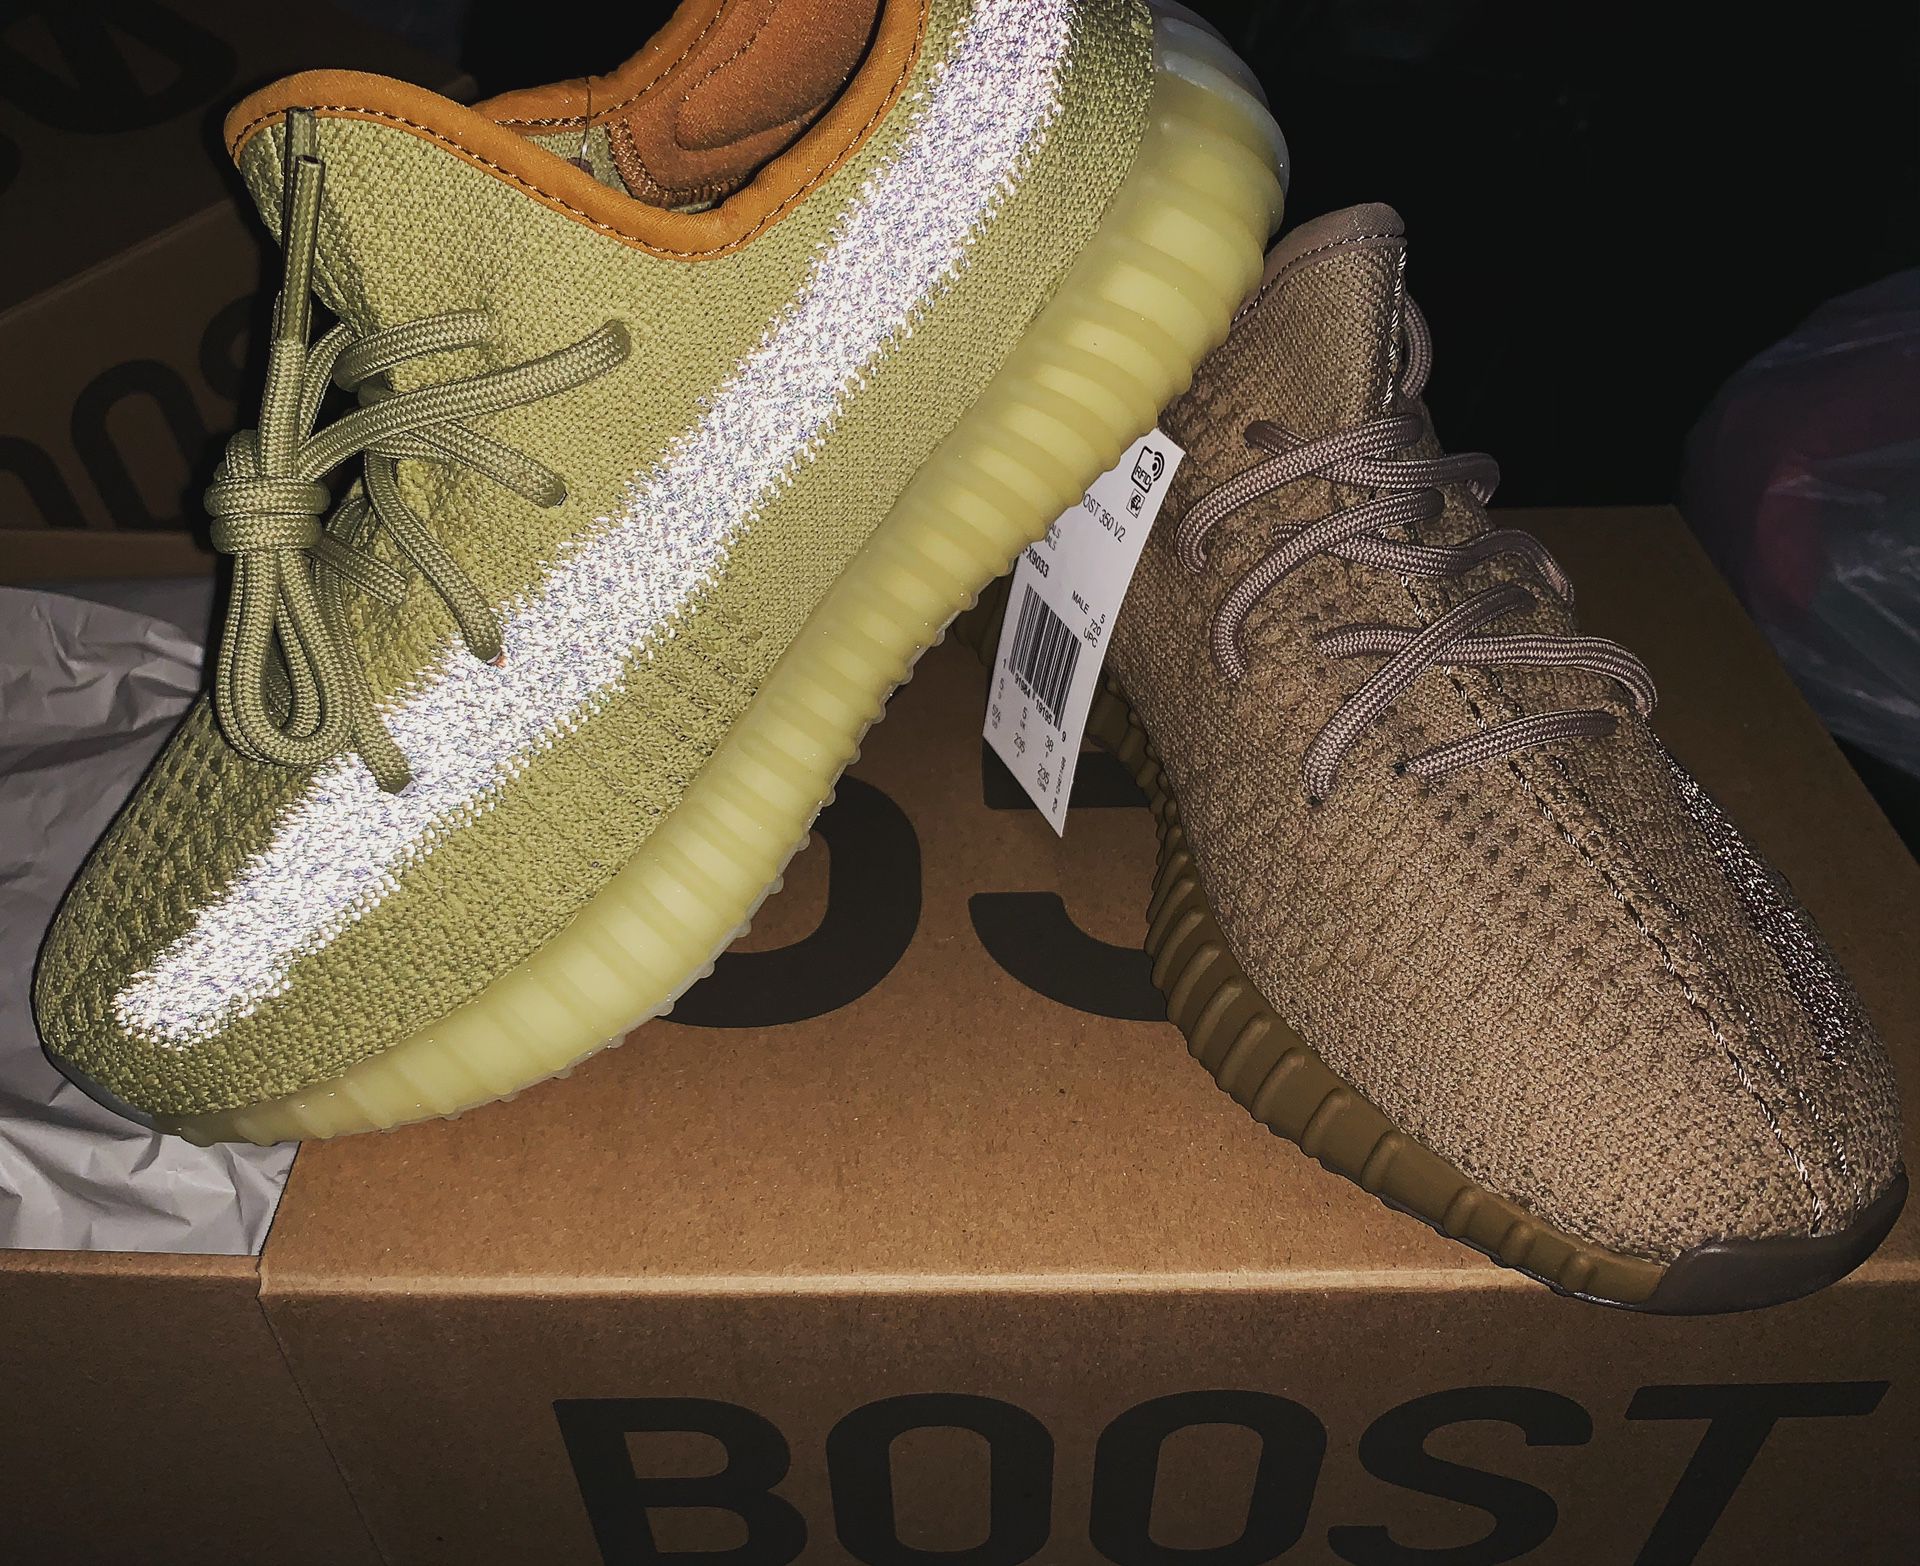 Yeezy Boost 350 V2 - Earth (Size 5.5)